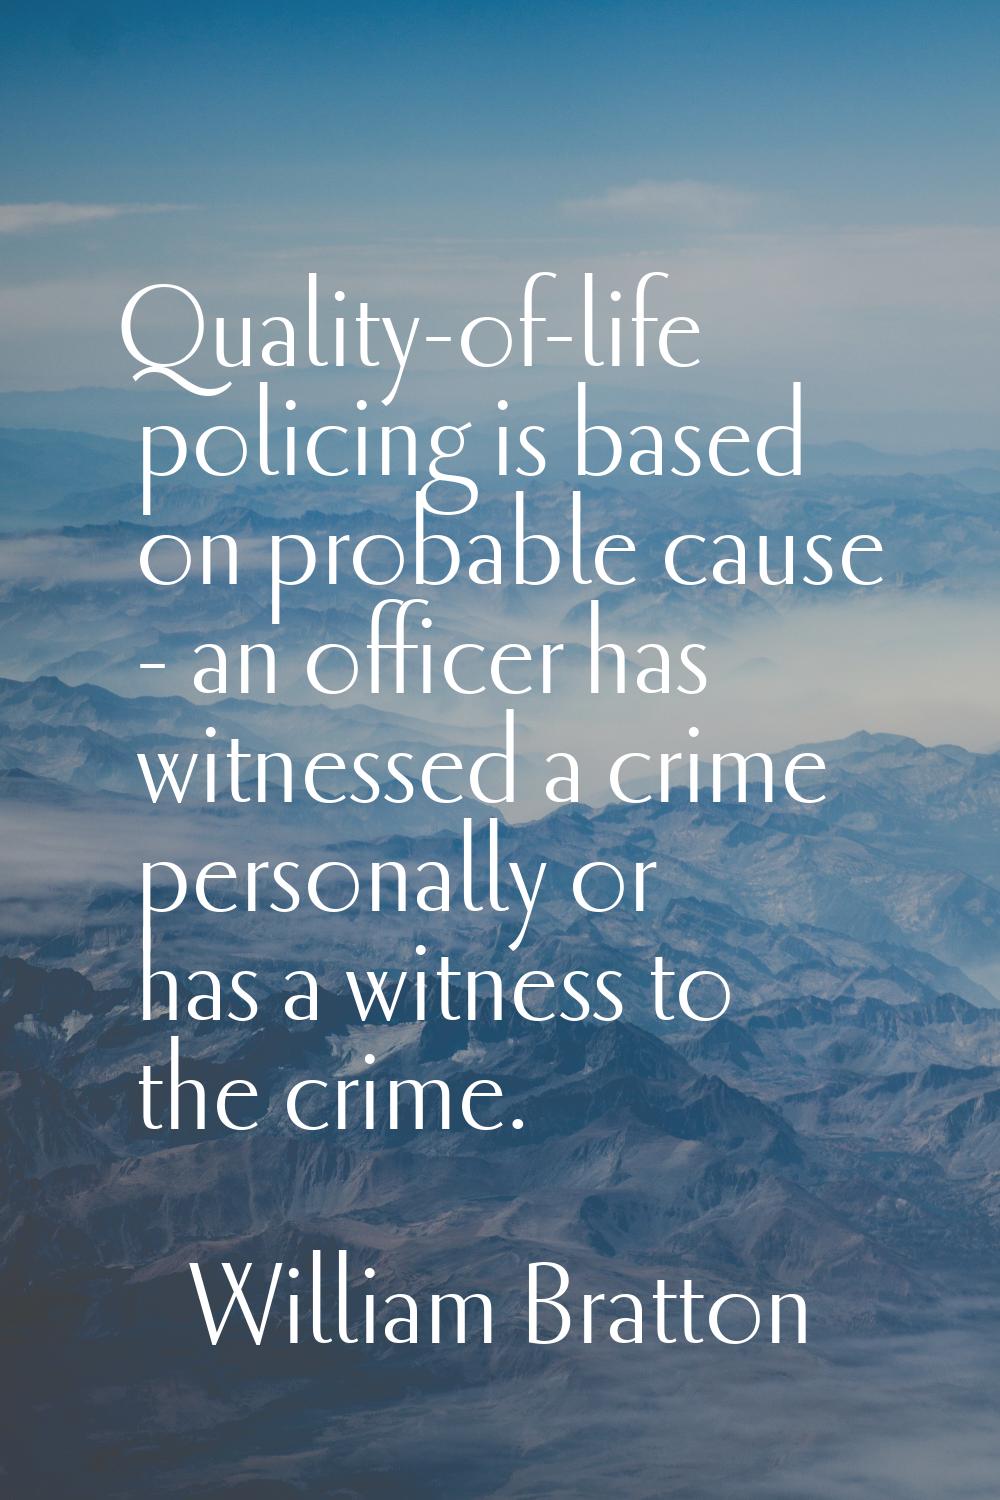 Quality-of-life policing is based on probable cause - an officer has witnessed a crime personally o